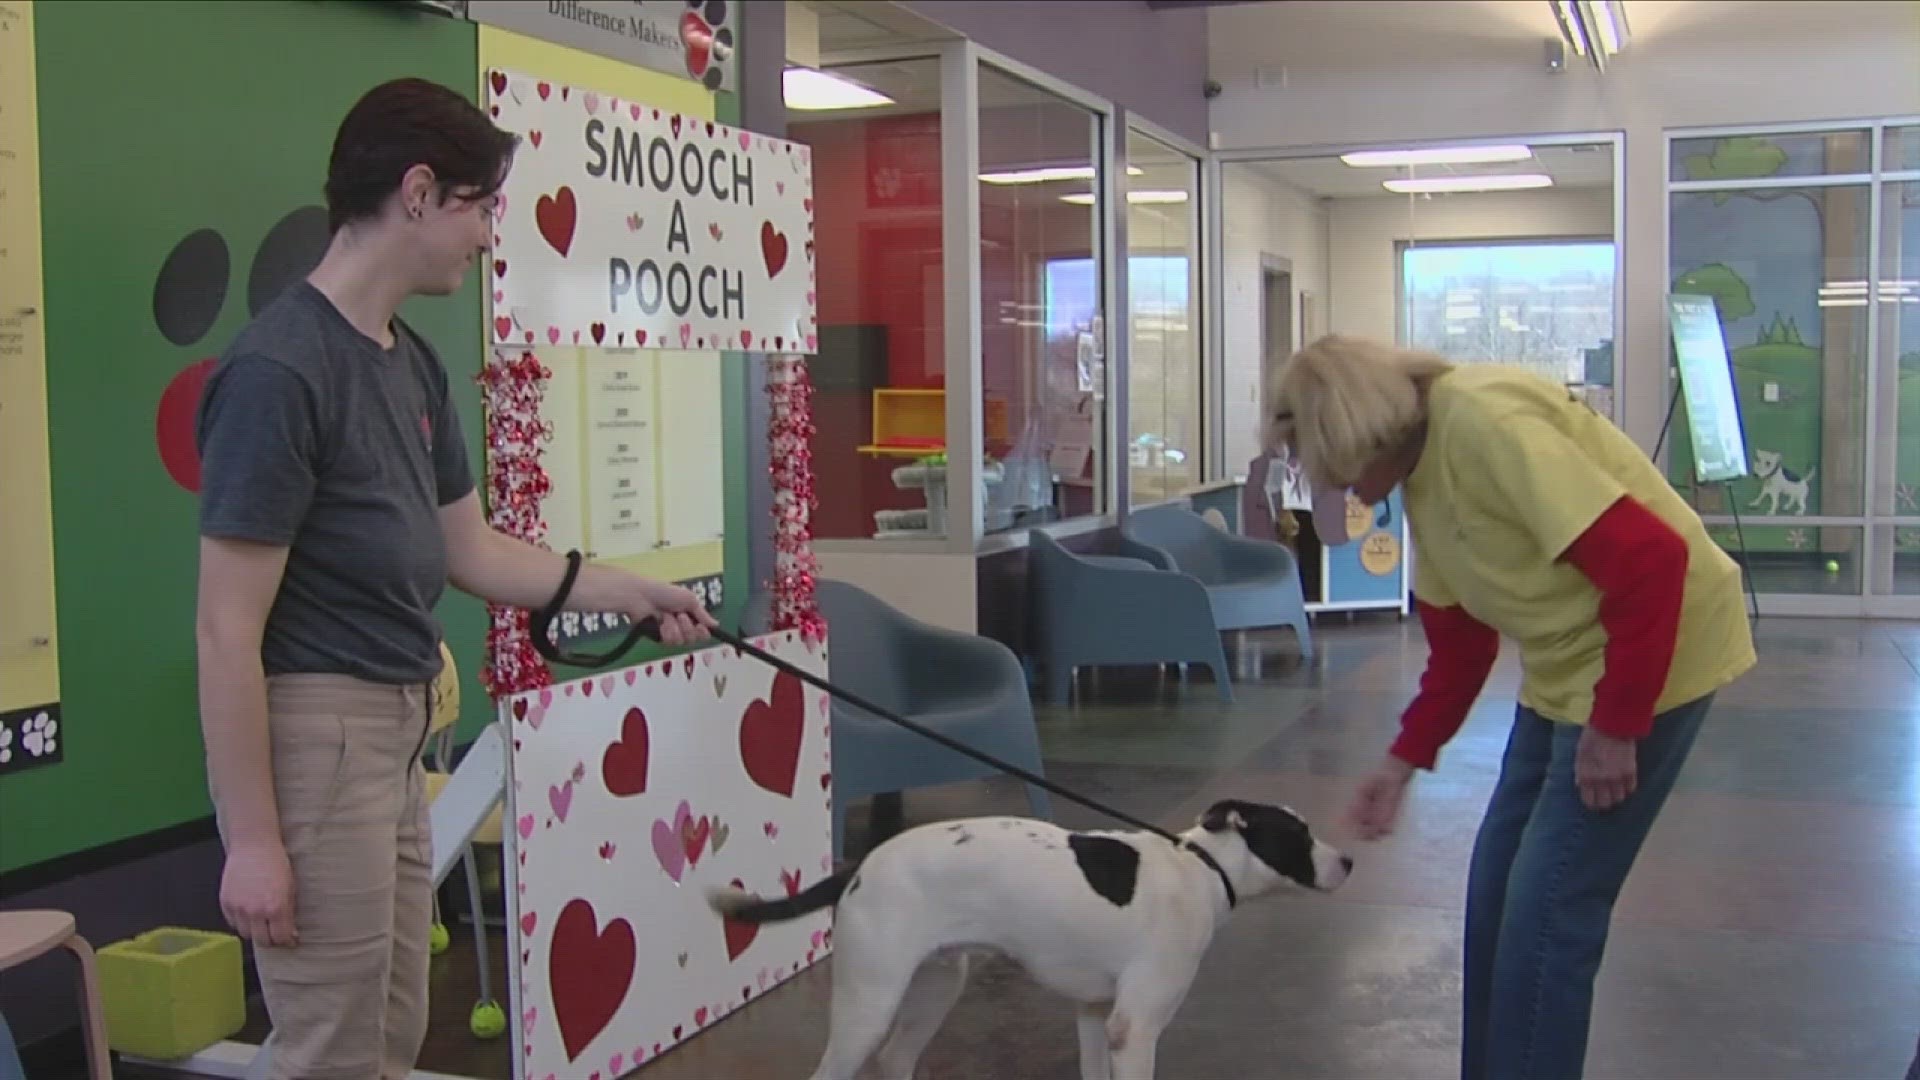 The organization invited people to stop by and get some love from puppies in need of adoptions.